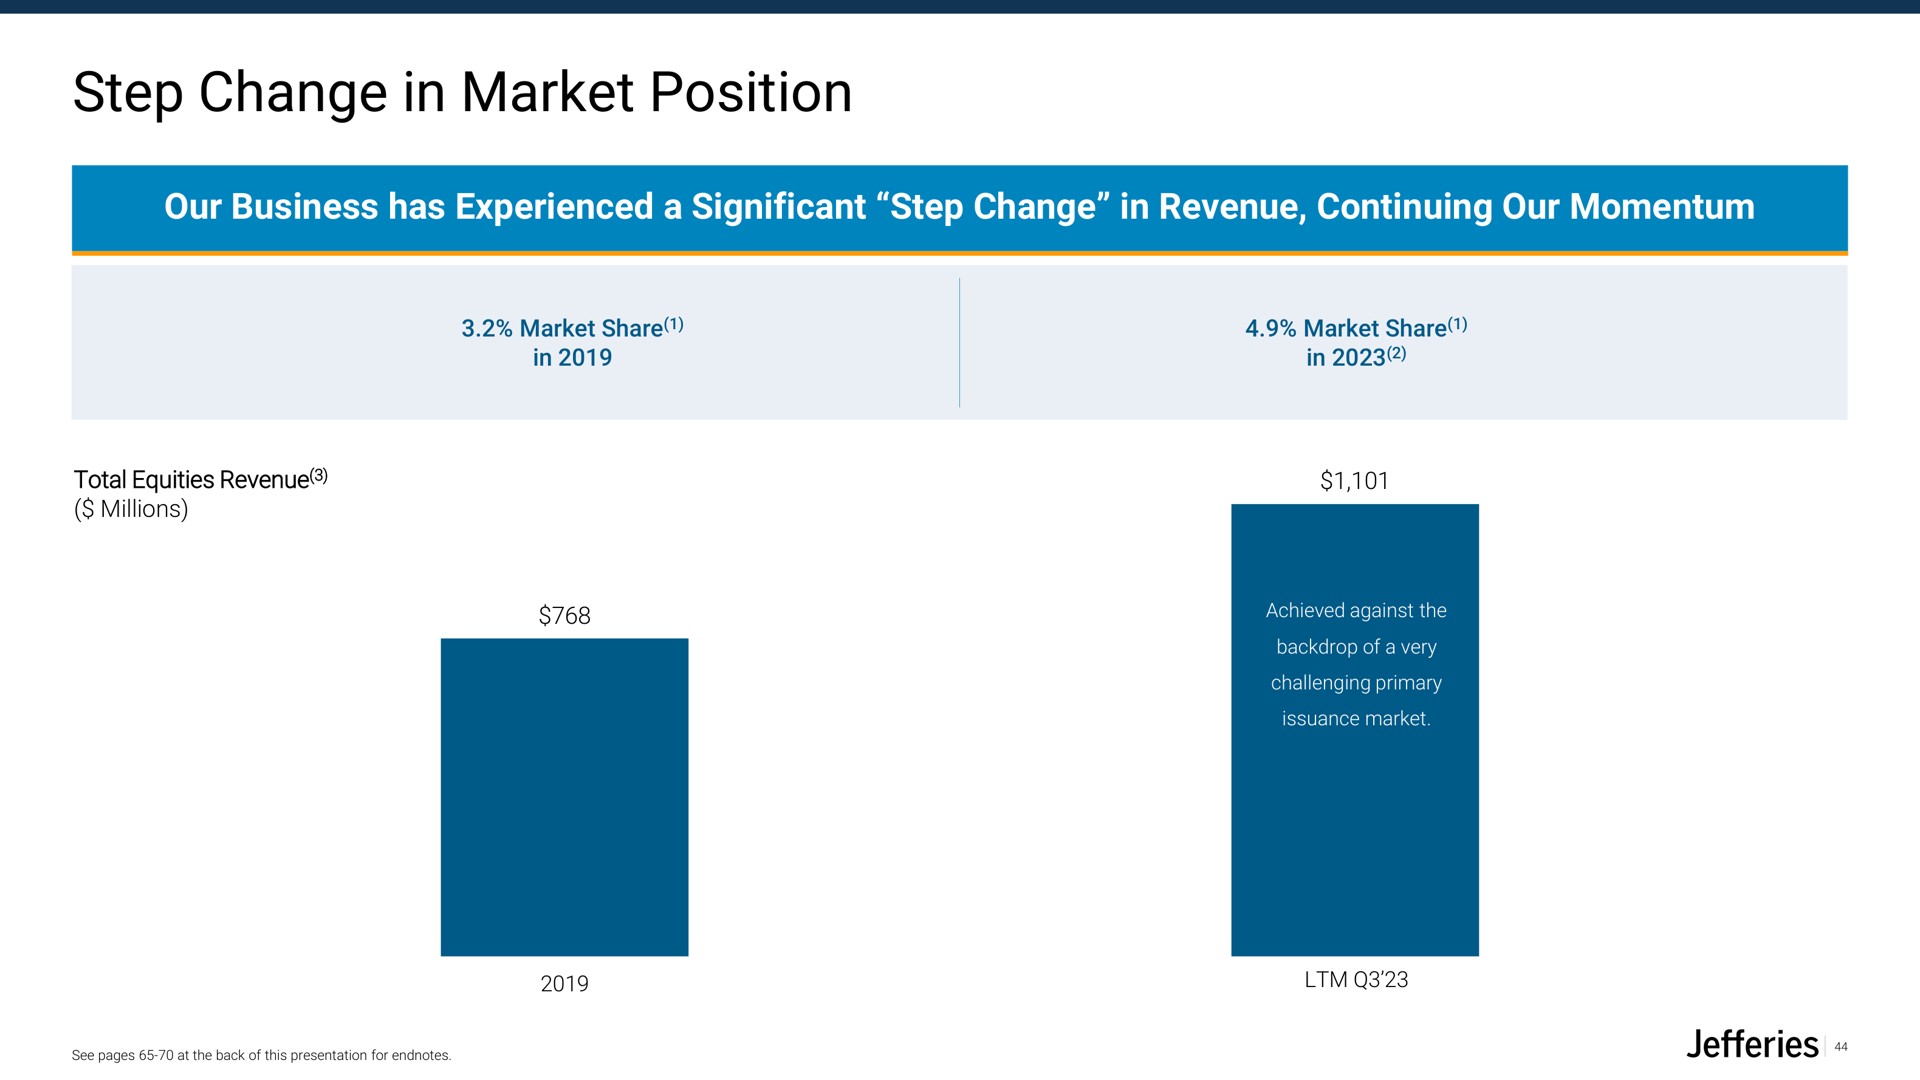 step change in market position | Jefferies Financial Group